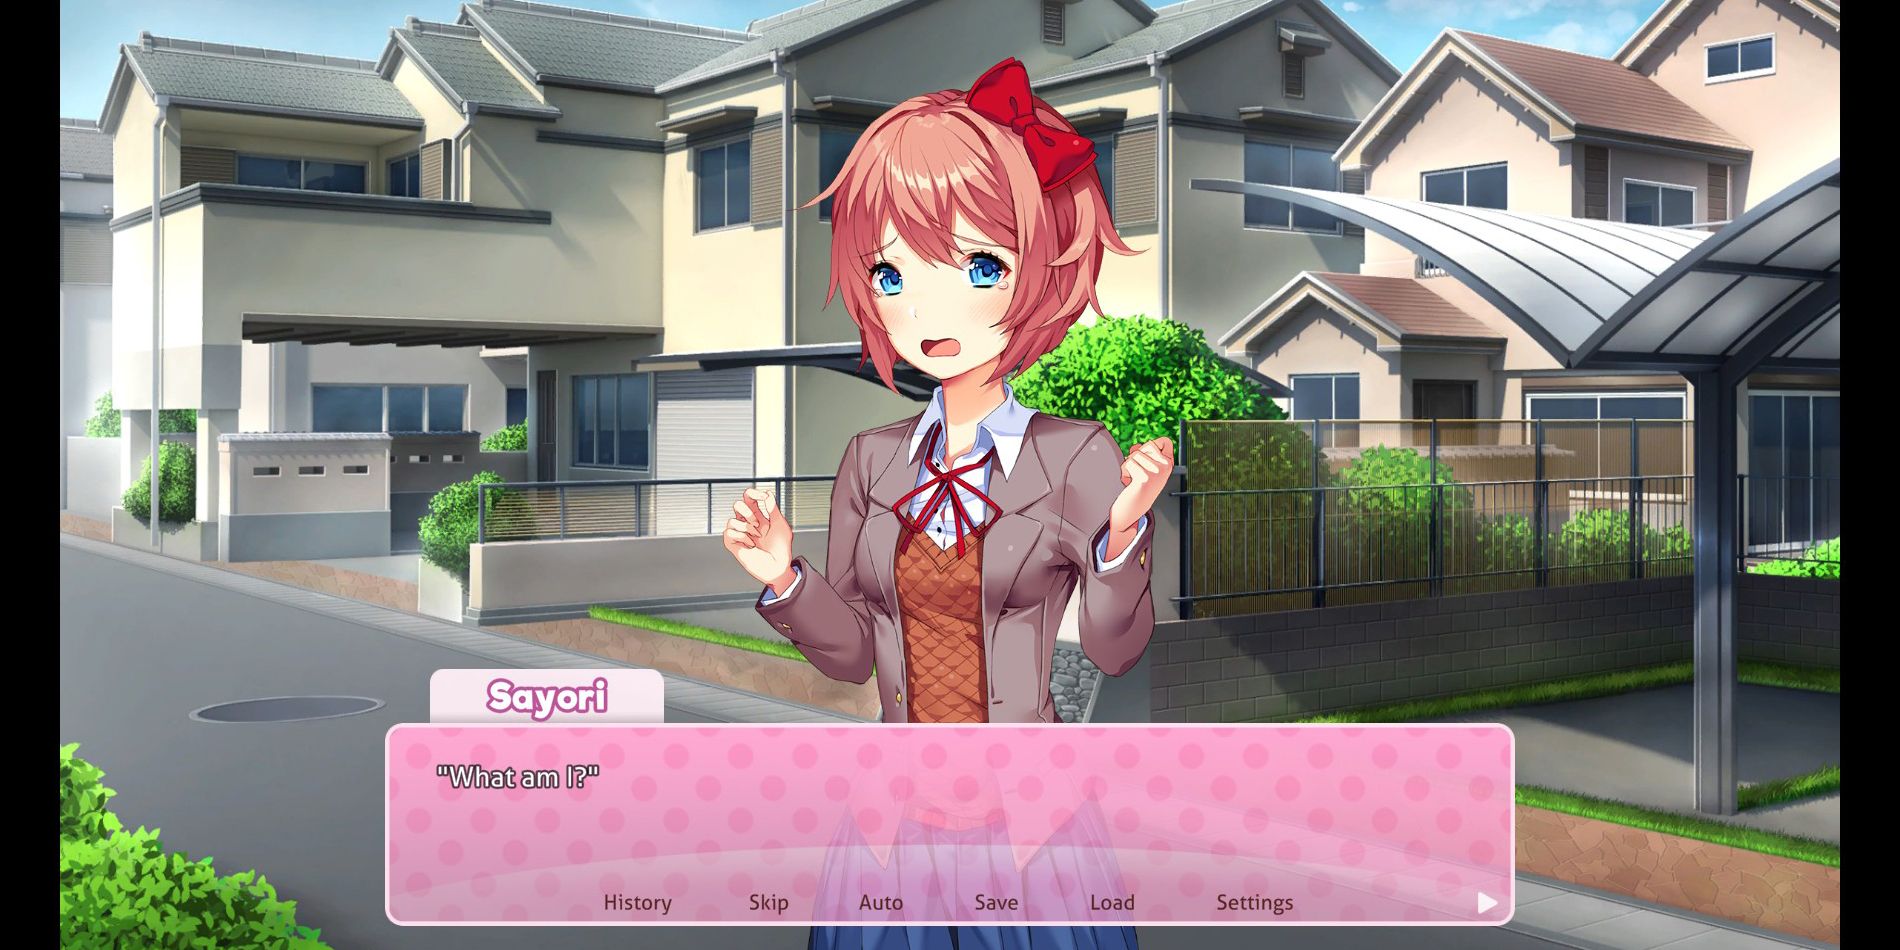 is there a good ending for doki doki